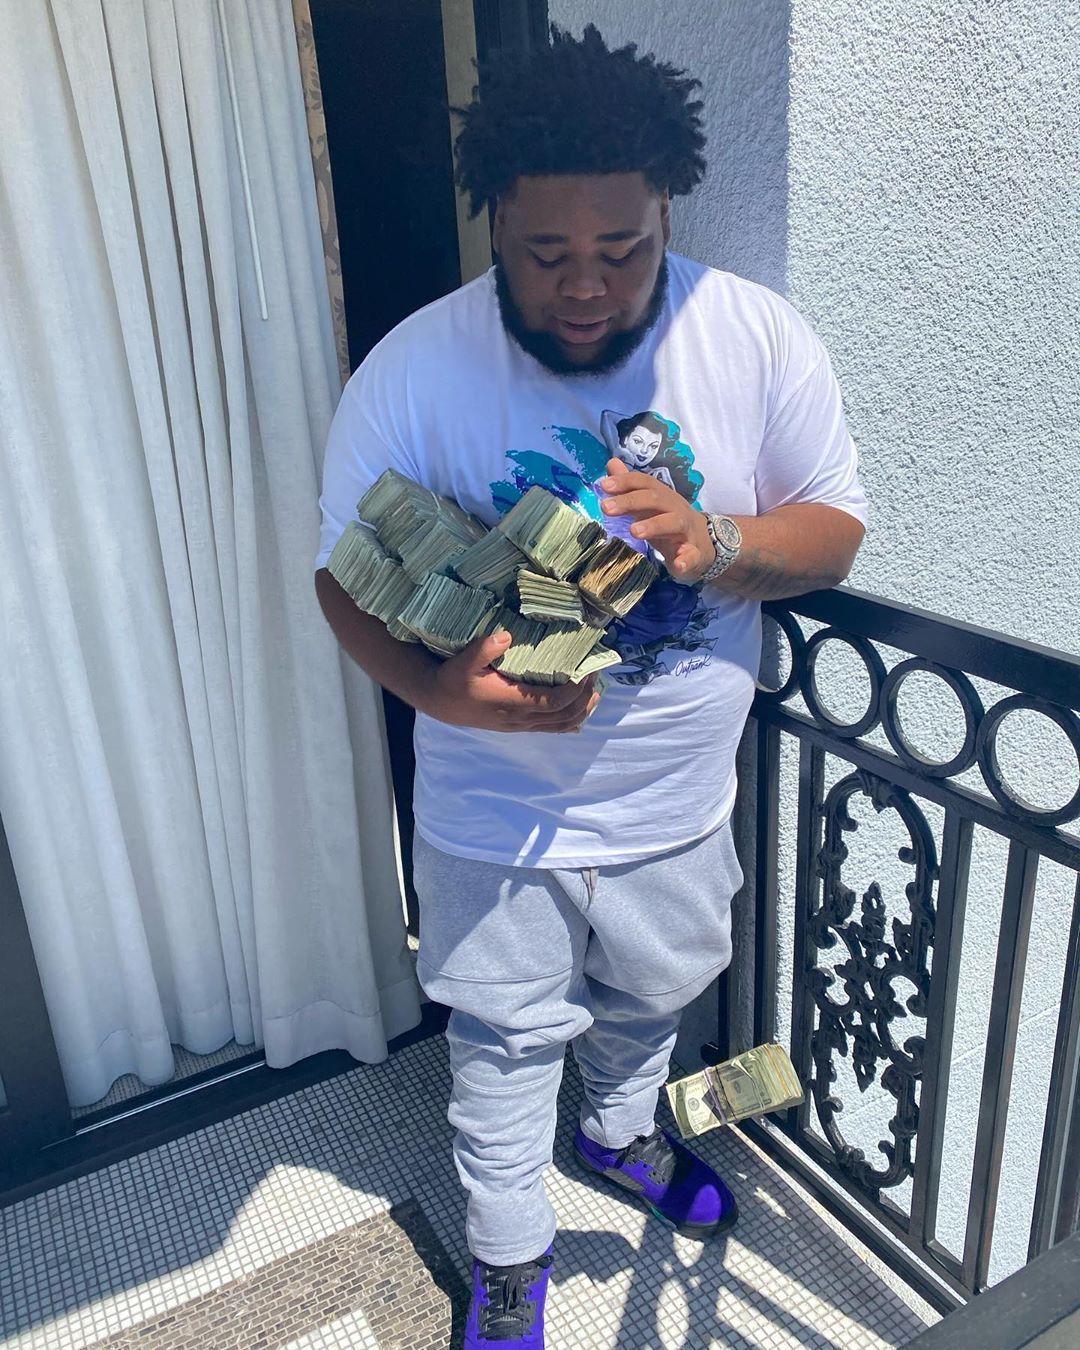 The rapper holding a pile of cash. - Rod Wave